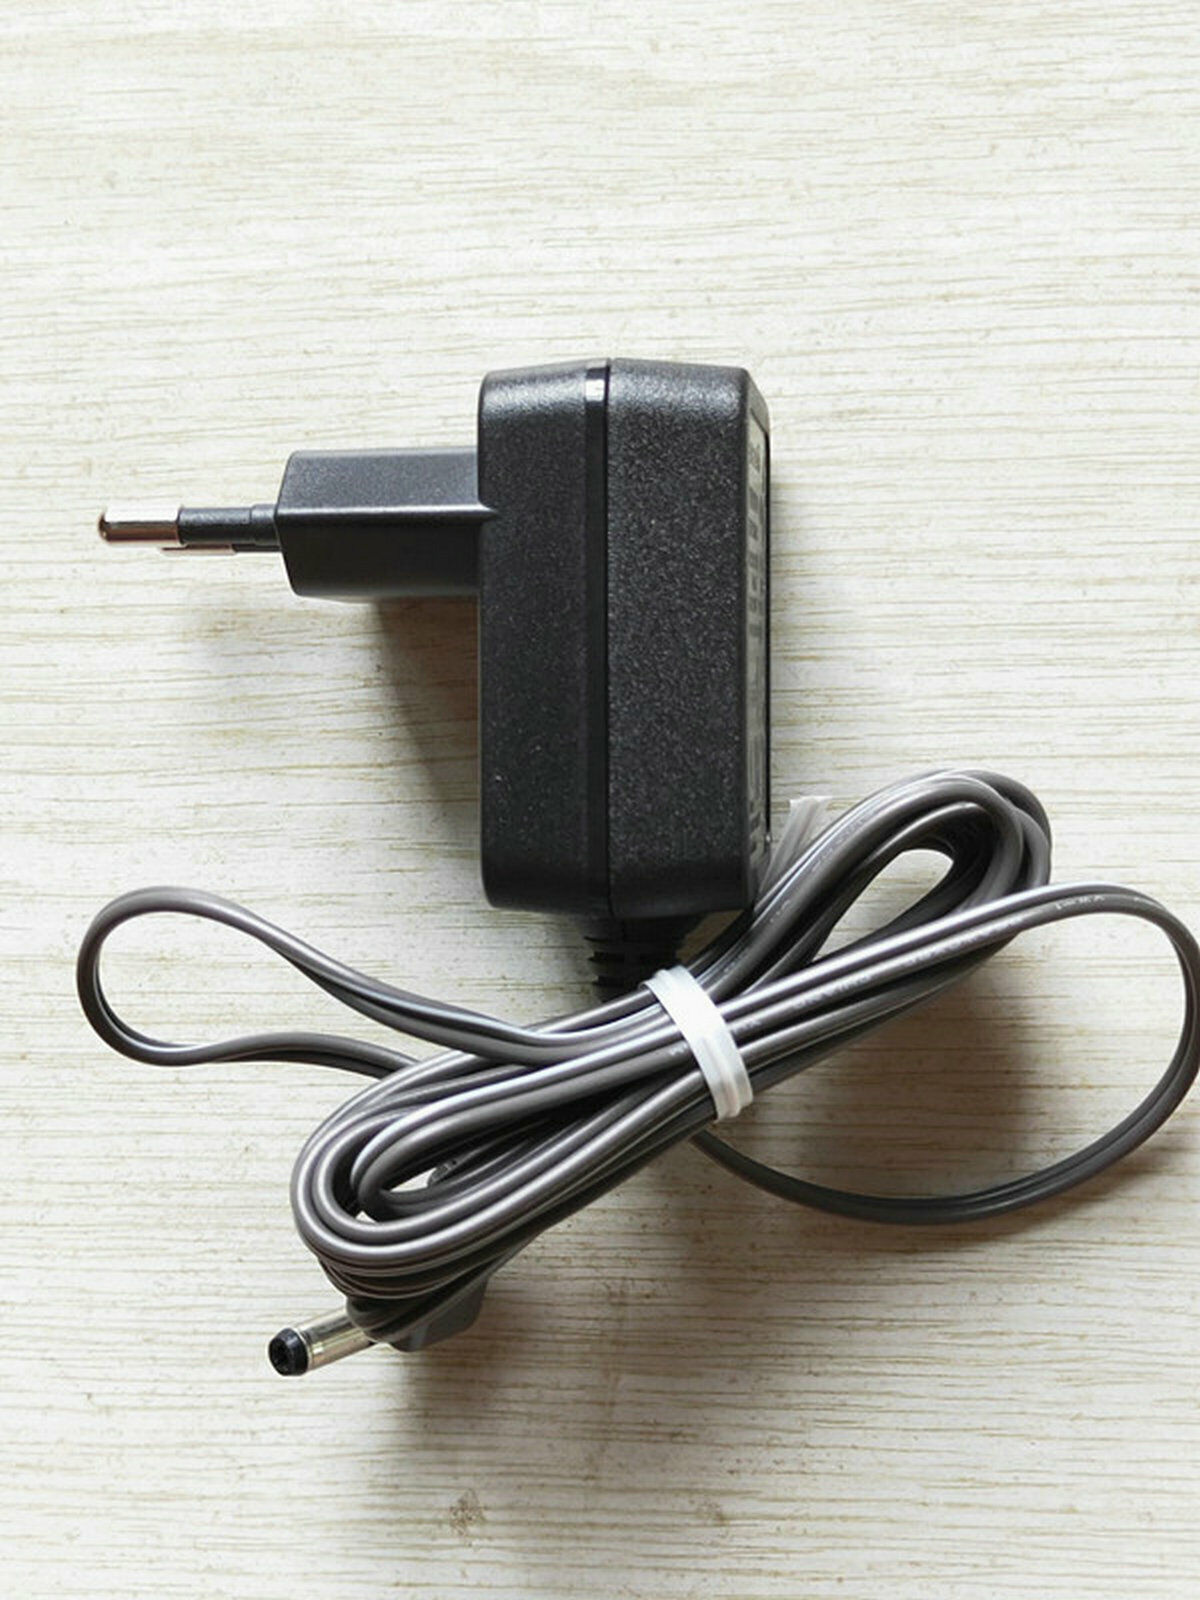 AC Adapter For Bluzen HP-669 7.4V Percussion Massager Massage Gun Power Charger Compatible Brand For Bluzen Type AC/DC